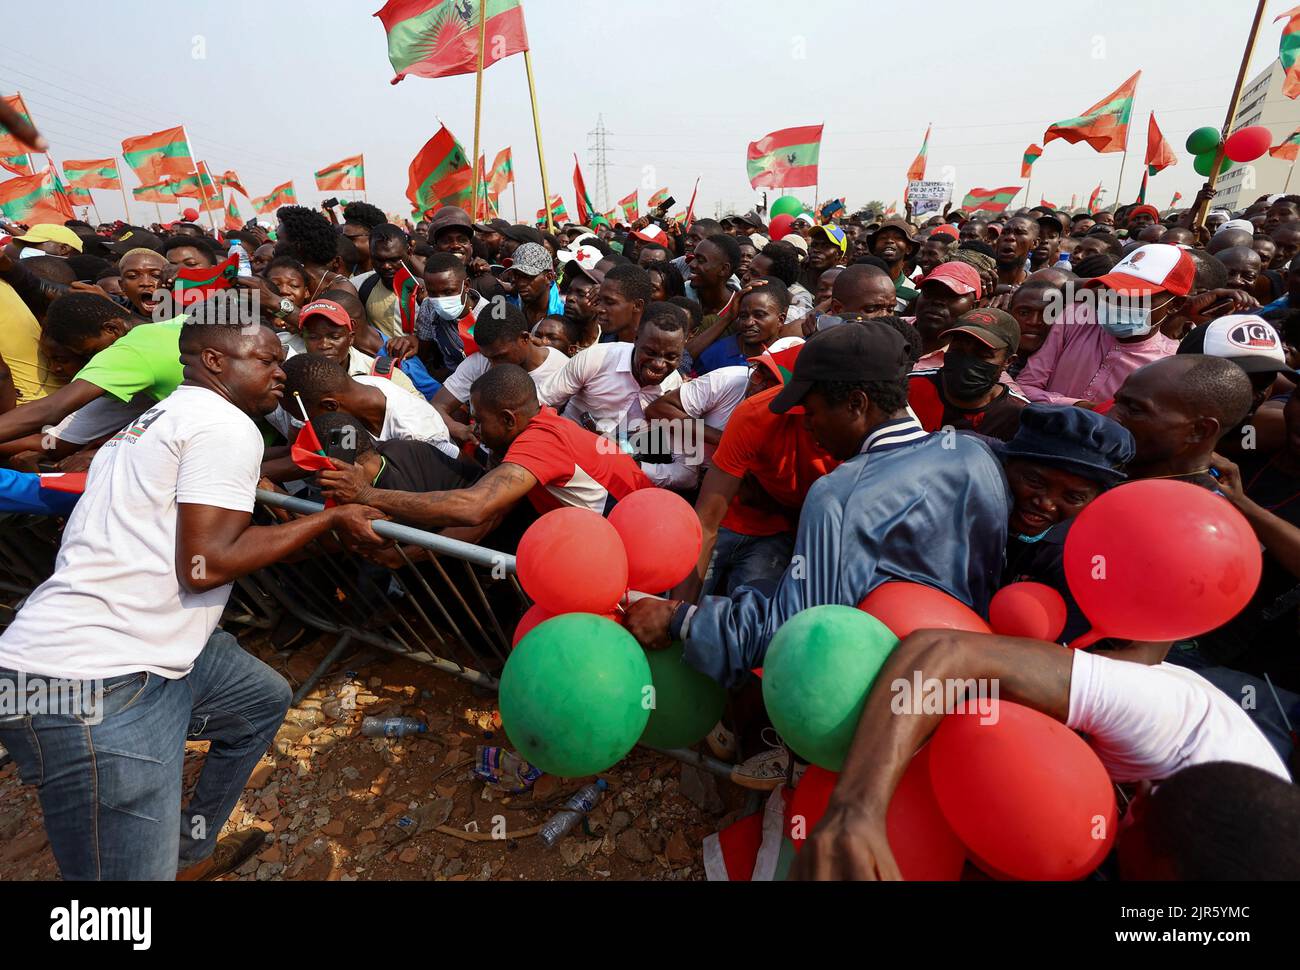 A man attempts to control supporters of Angola's main opposition party UNITA, as they attend the party's final rally at Cazenga, outside the capital Luanda in Angola, August 22, 2022.REUTERS/Siphiwe Sibeko Stock Photo